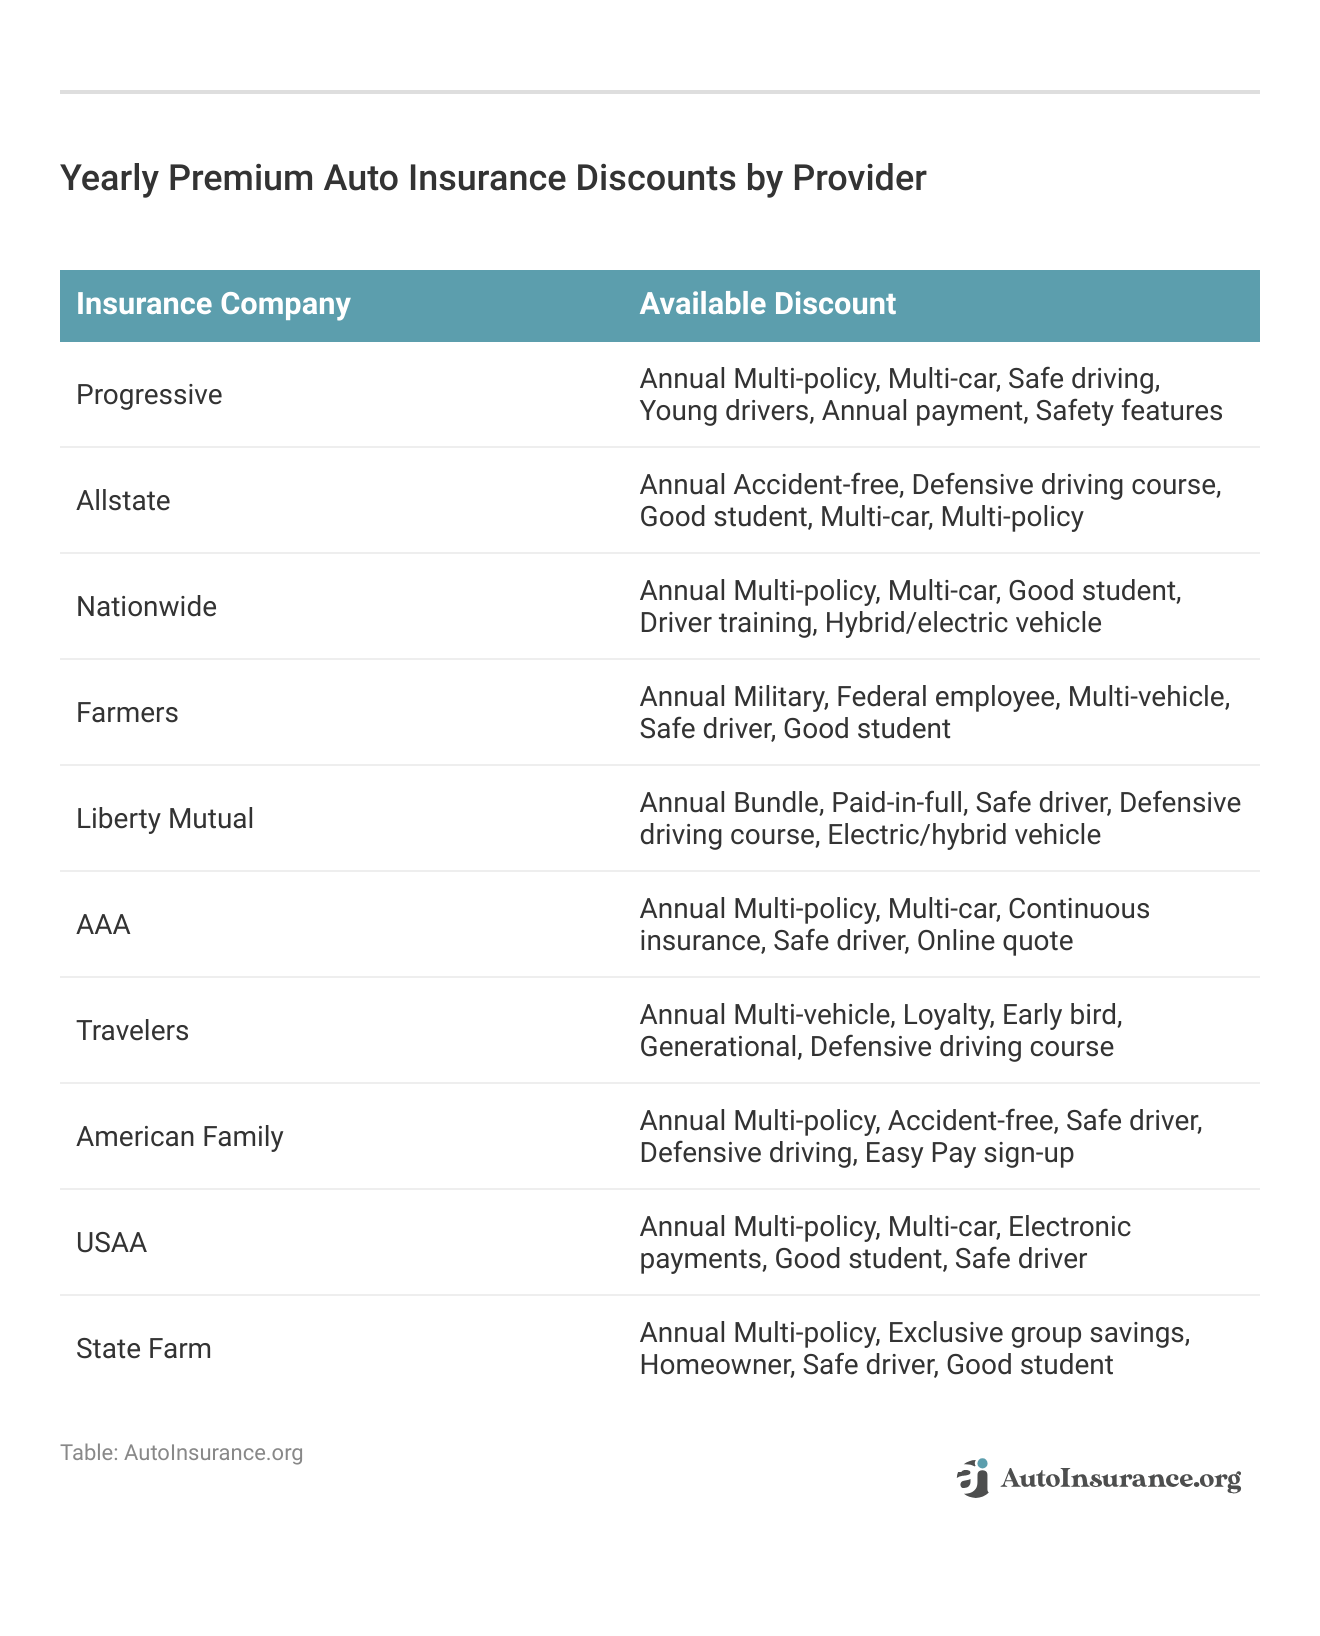 <h3>Yearly Premium Auto Insurance Discounts by Provider</h3>